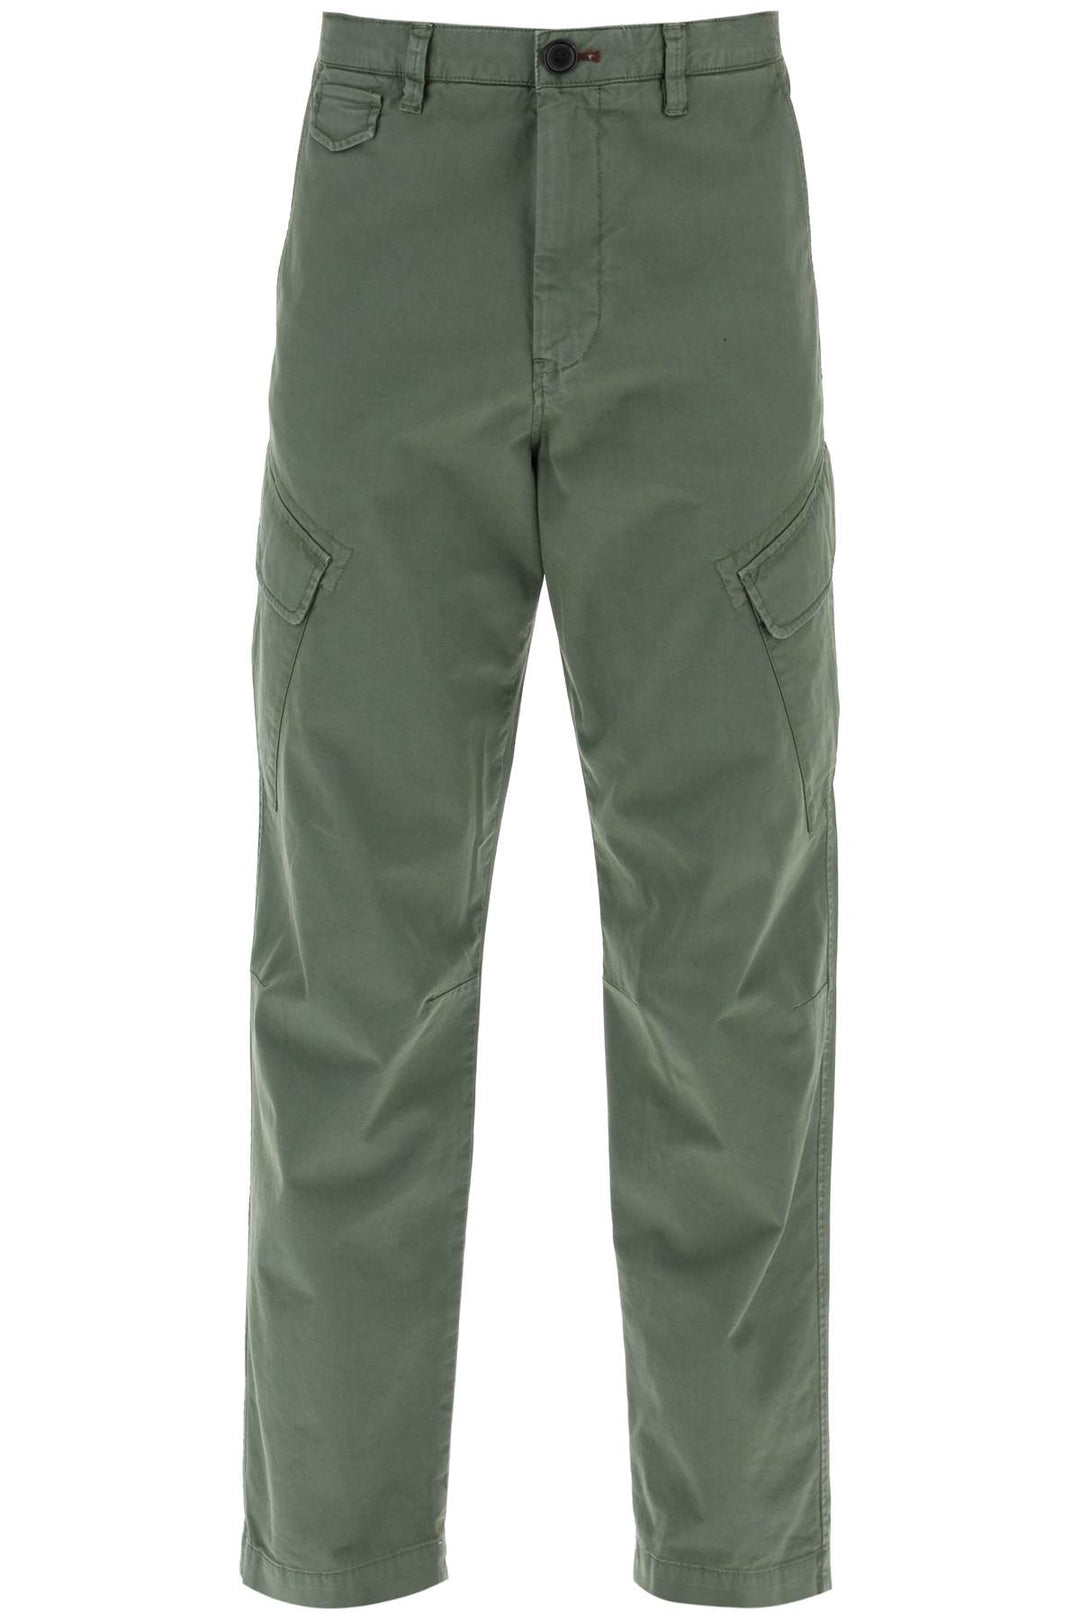 Ps paul smith stretch cotton cargo pants for men/w-0